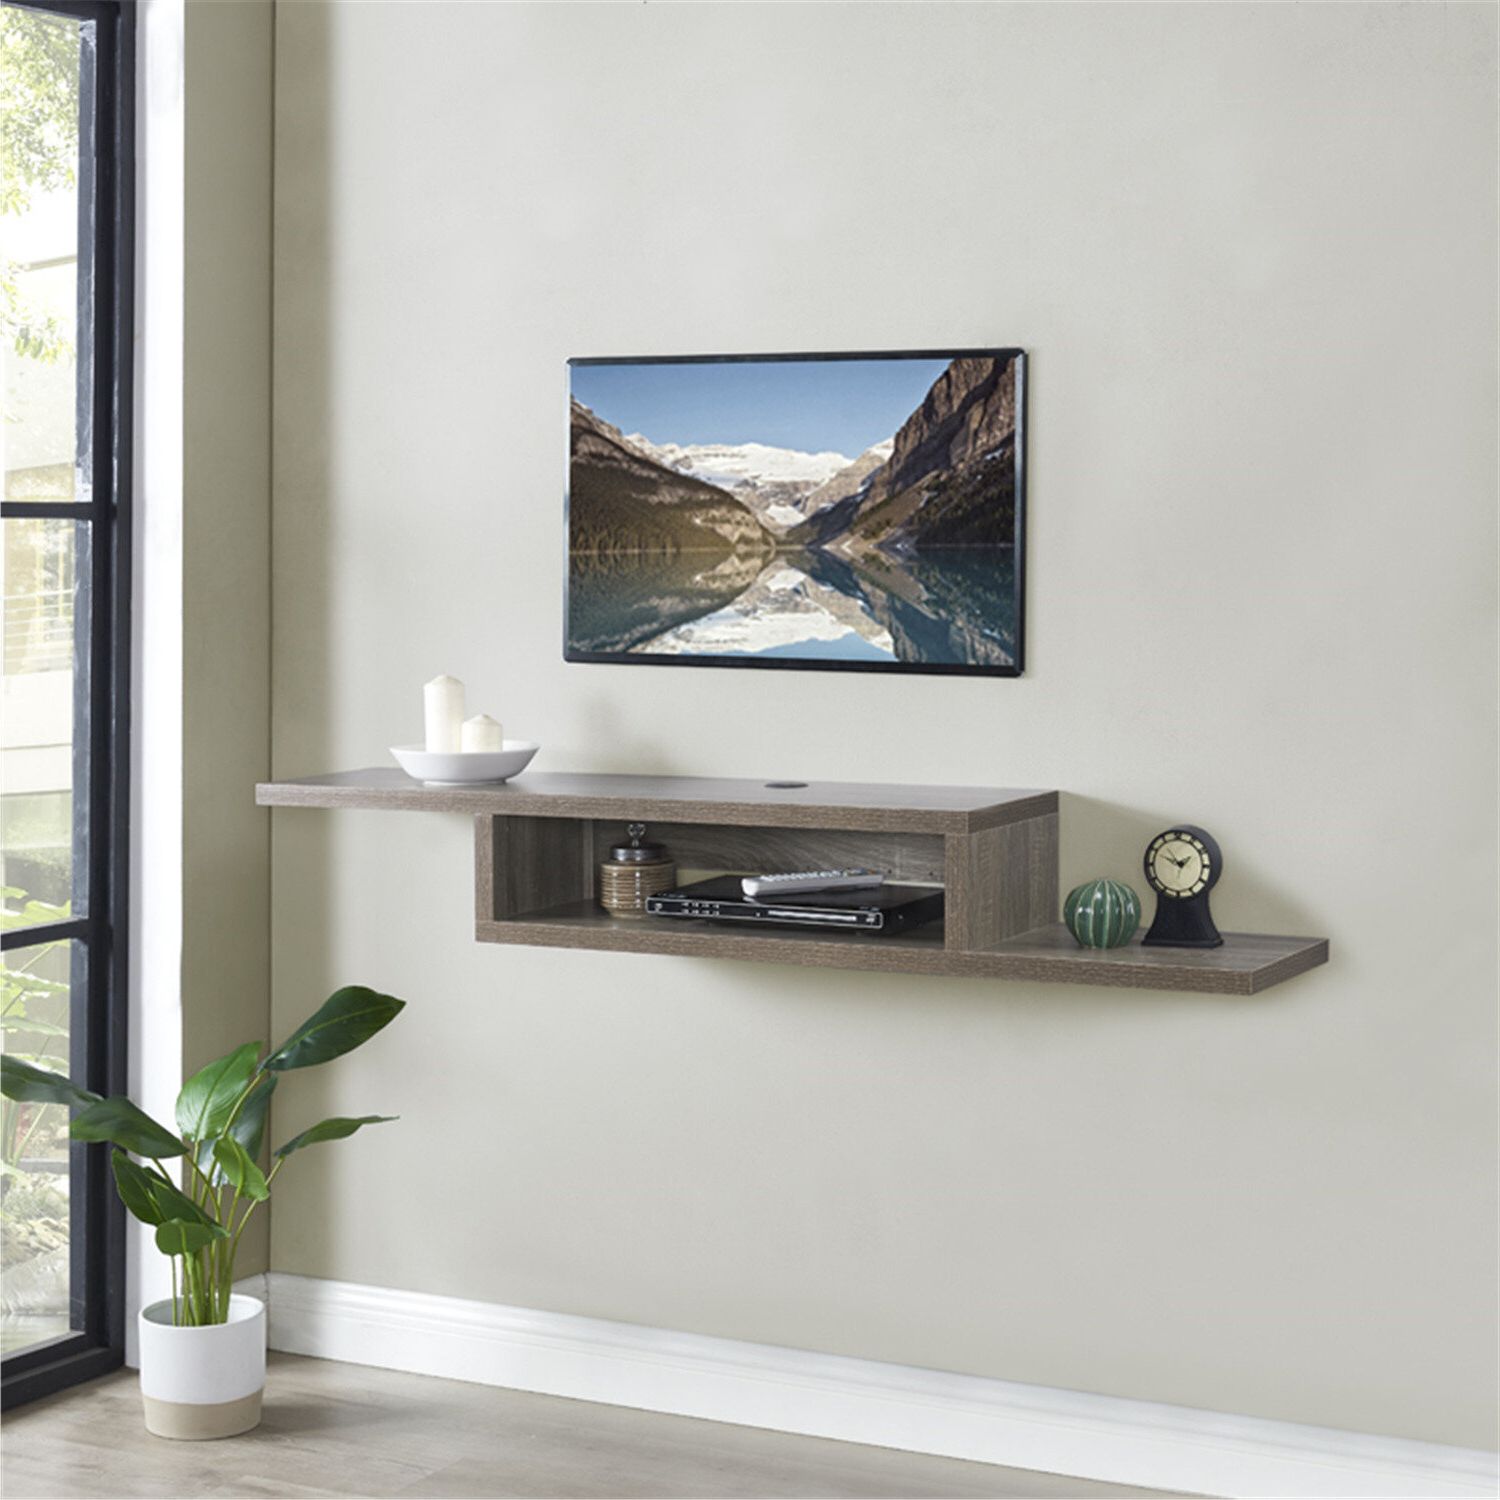 Latitude Run® Solid Wood Floating Tv Stand For Tvs Up To 65" & Reviews |  Wayfair Within Wall Mounted Floating Tv Stands (Gallery 20 of 20)